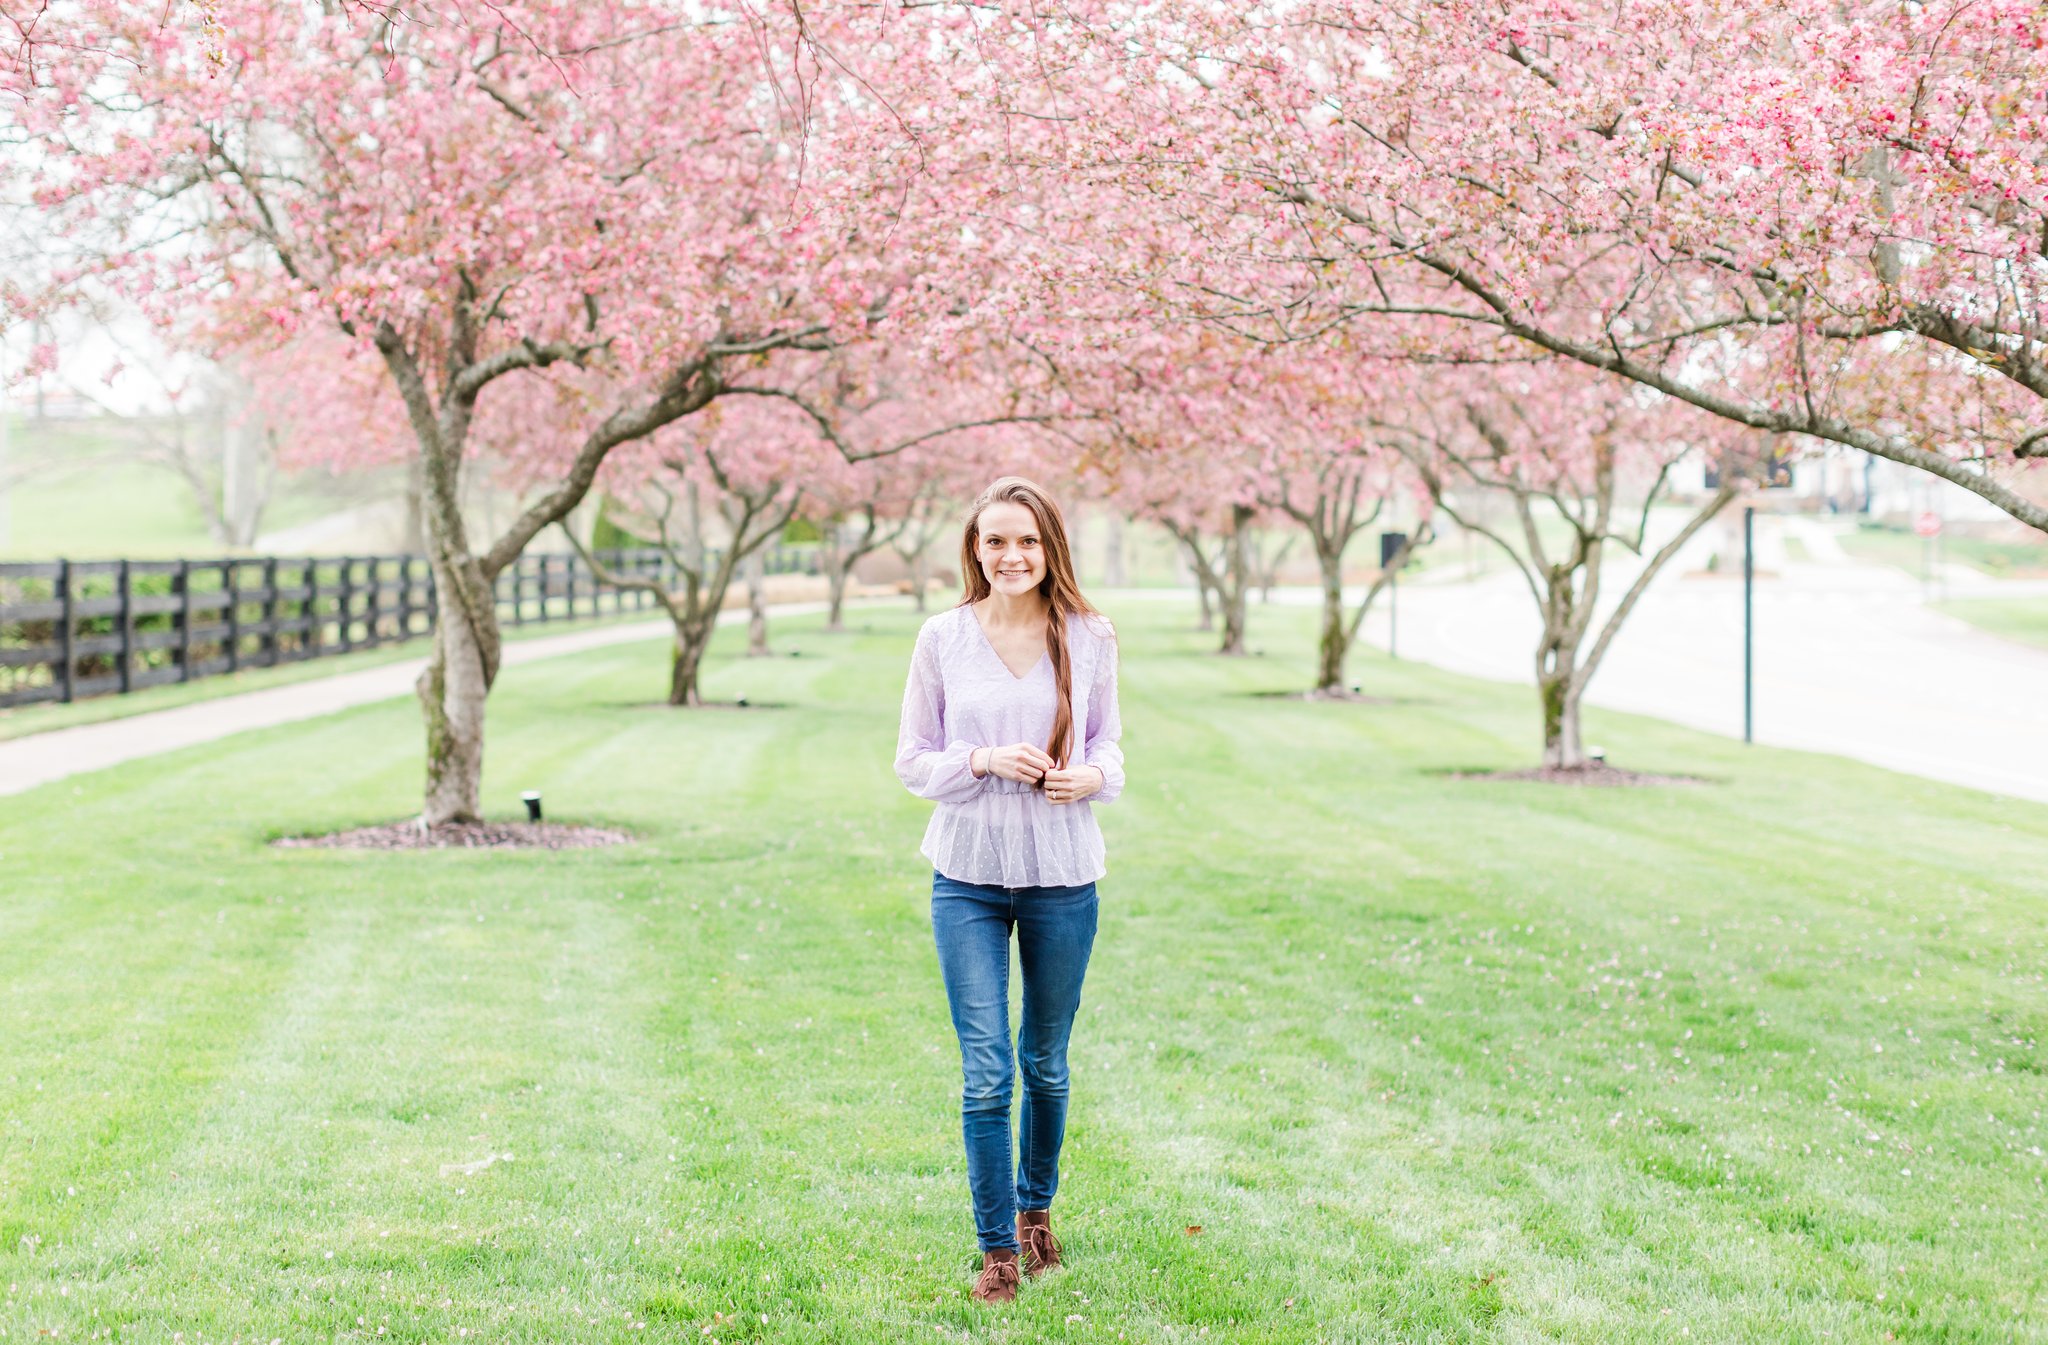 Jennifer Cooke, wedding photographer, walking and smiling in an Eastern Redbud tree patch excited to talk about HoneyBook, an online contract signing software!